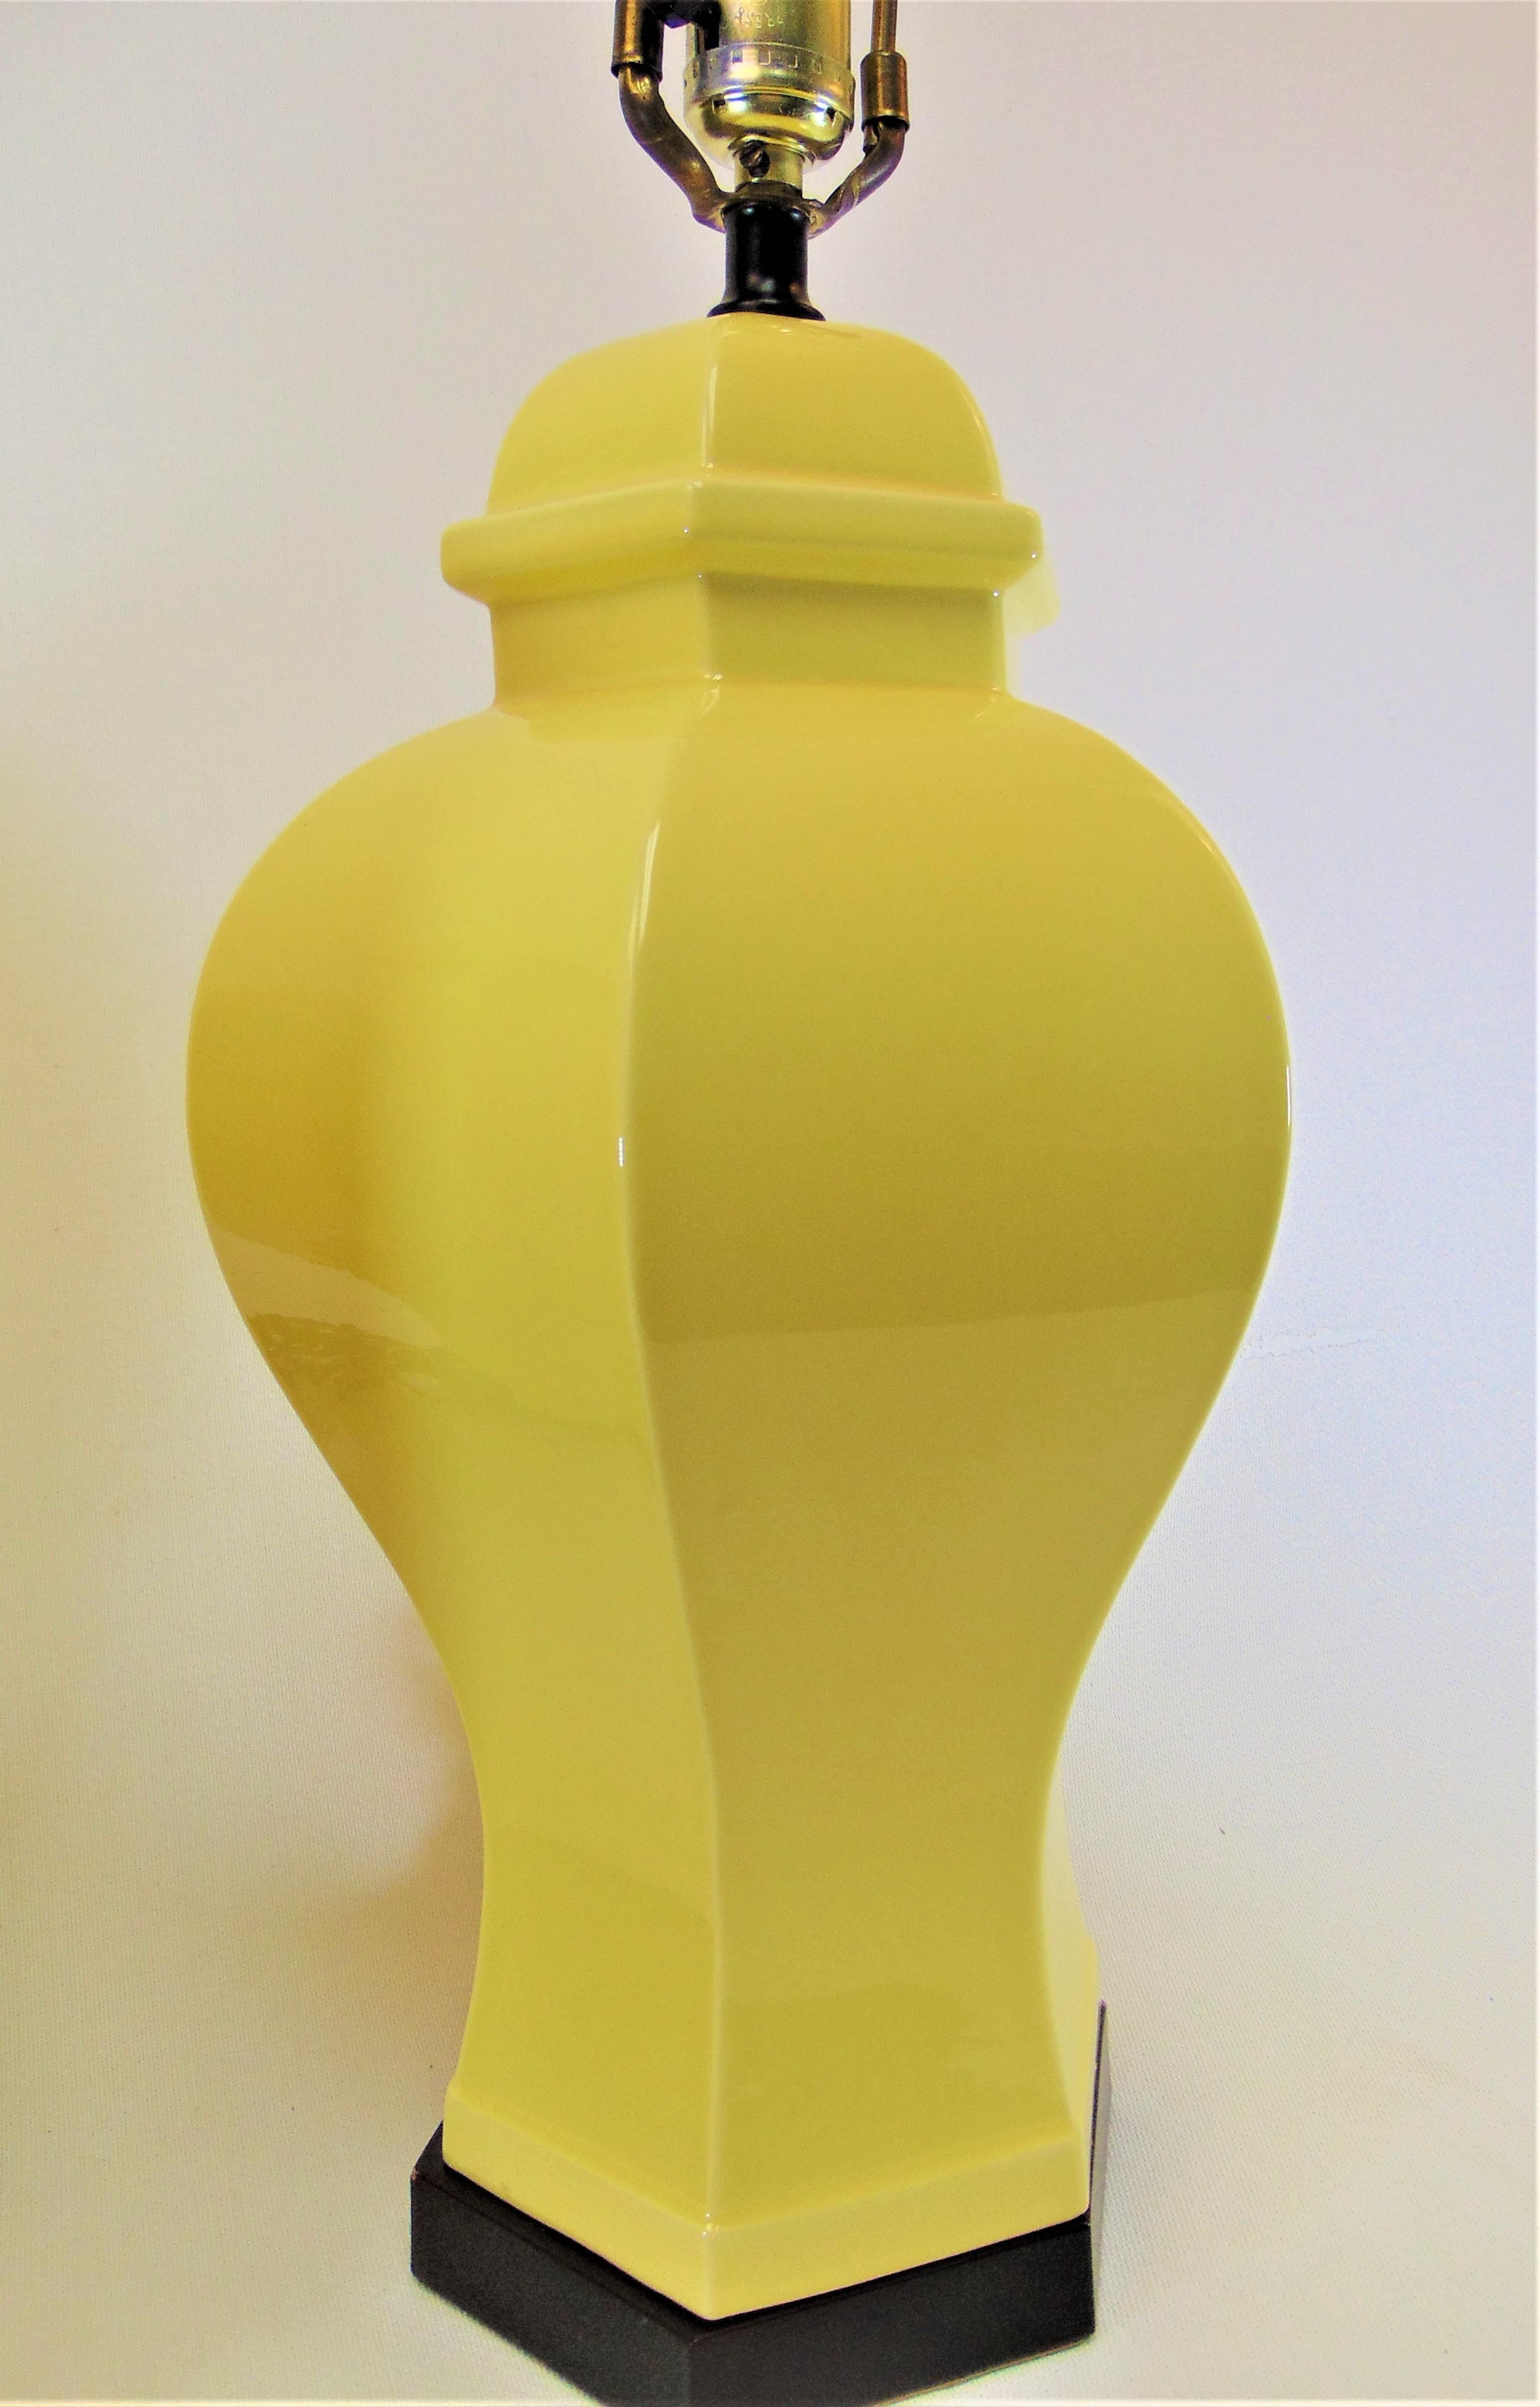 Asian Inspired Pair of Yellow Ceramic Table Lamps by Paul Hanson In Good Condition For Sale In Tulsa, OK